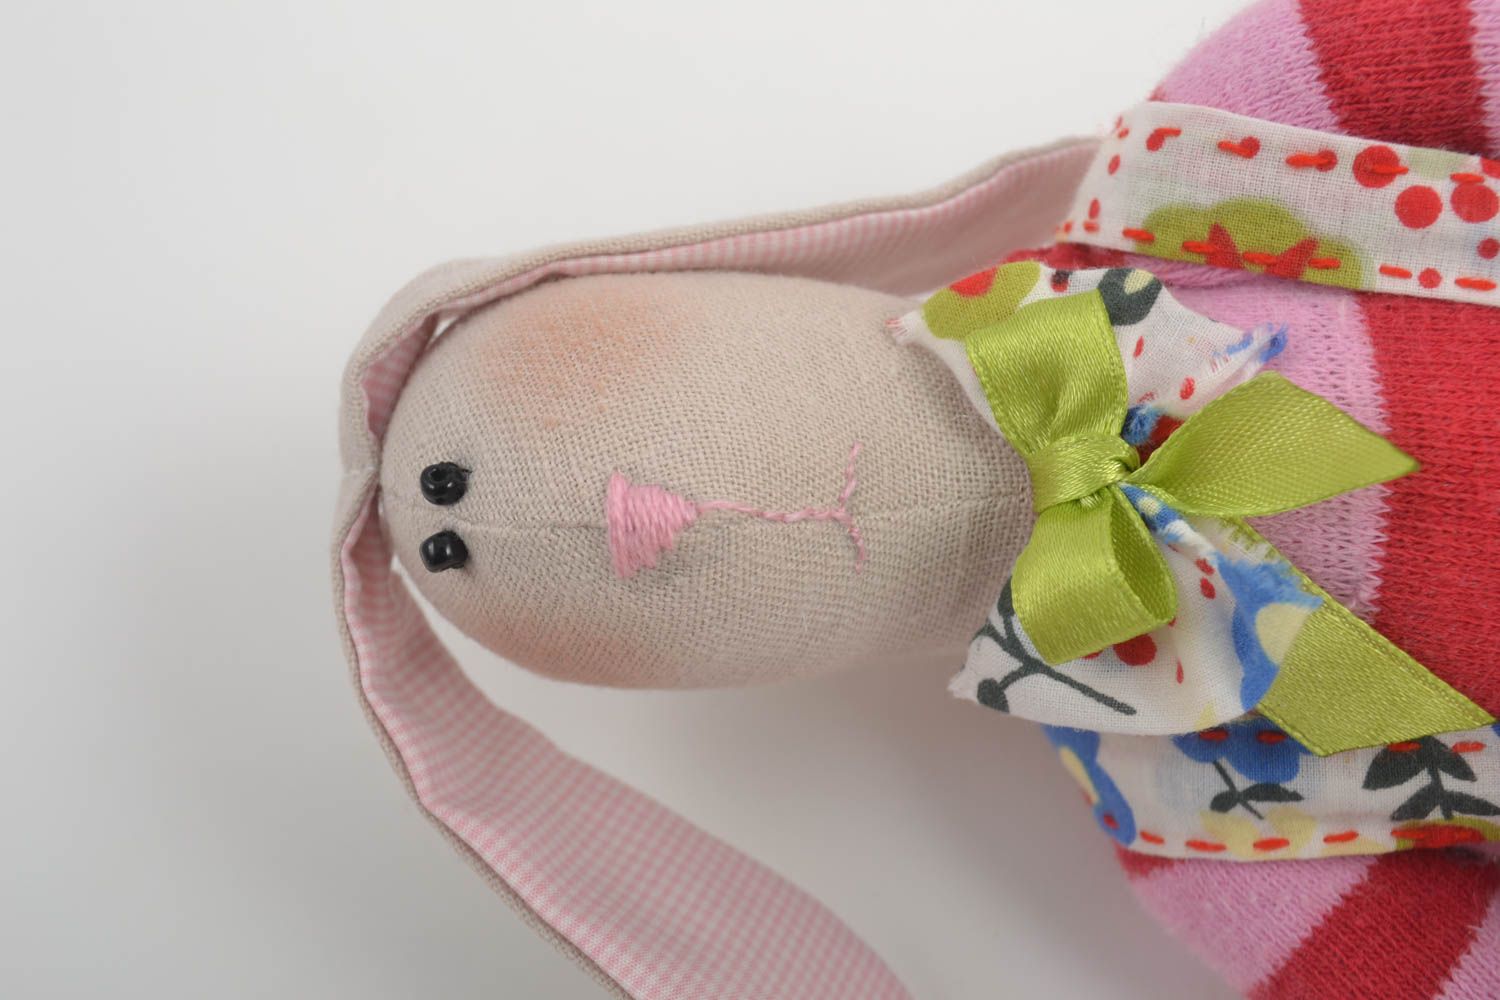 Handmade soft toy Easter gift ideas stuffed toy interior design styles photo 2